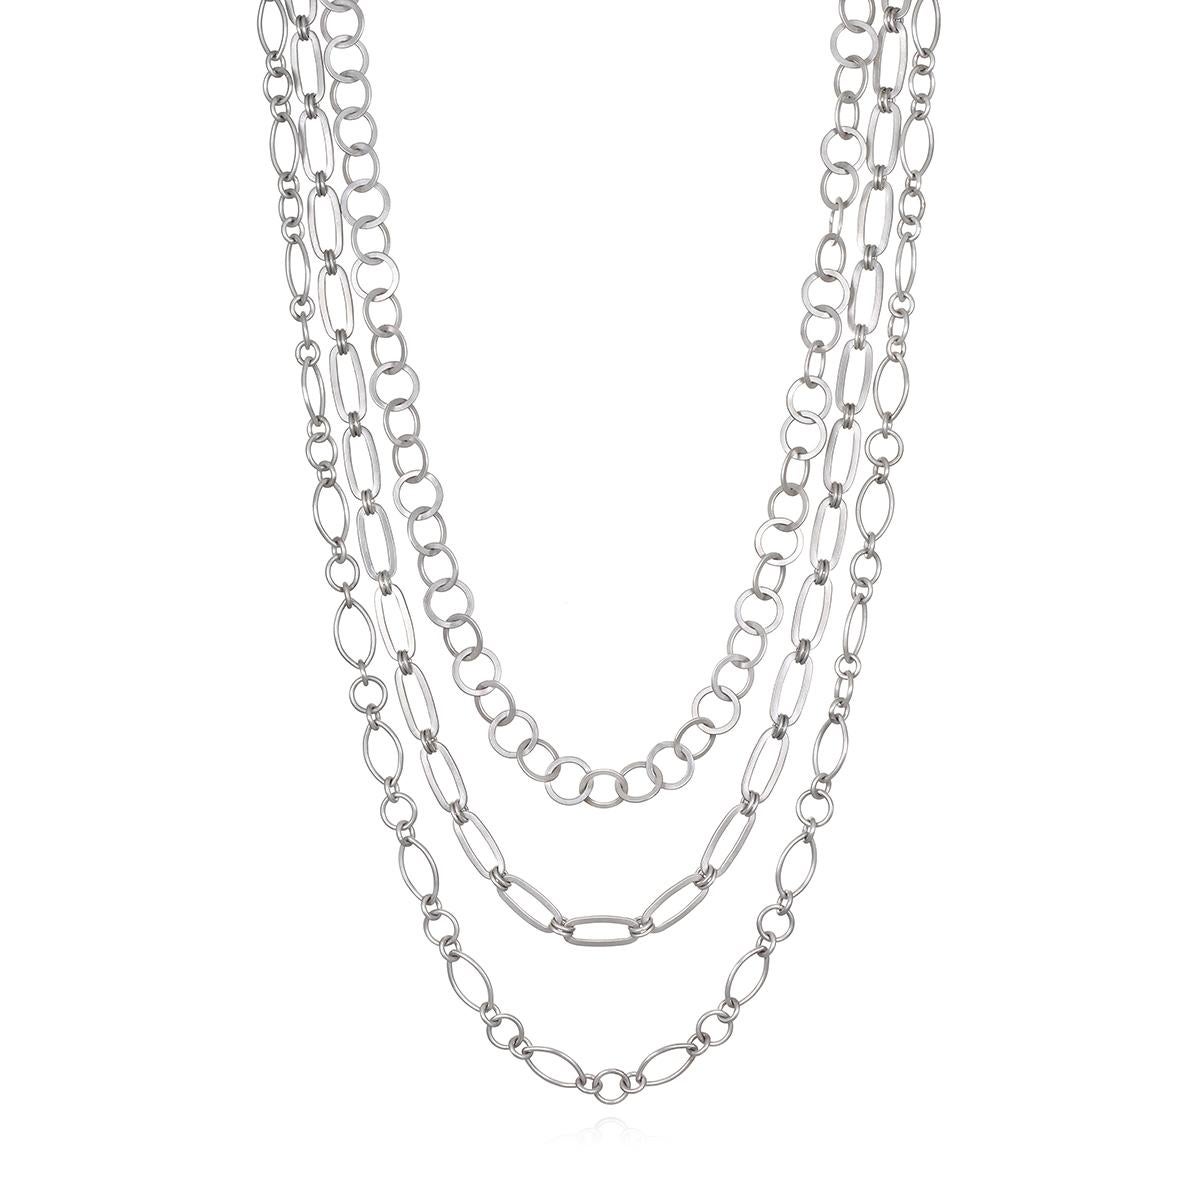 Faye Kim Platinum Handmade Mini Marquise Link Necklace is both classic and versatile, and is certain to become a must have in every jewelry wardrobe. Alternating mixed shaped links give texture and uniqueness to this chain, bringing it to a whole